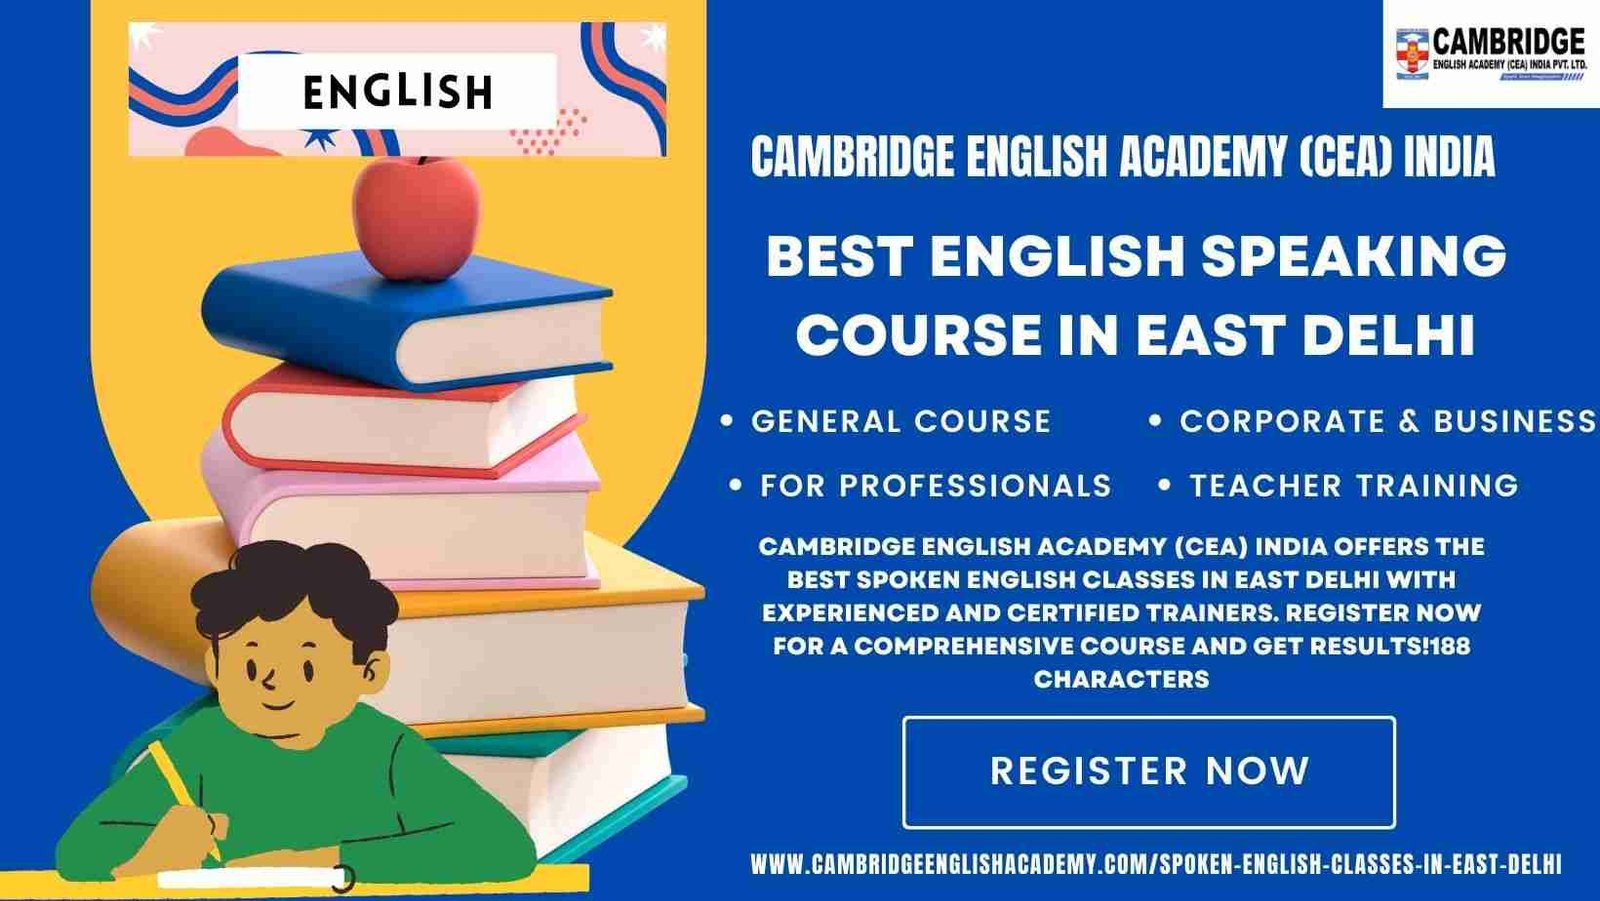 English Speaking Course in East Delhi